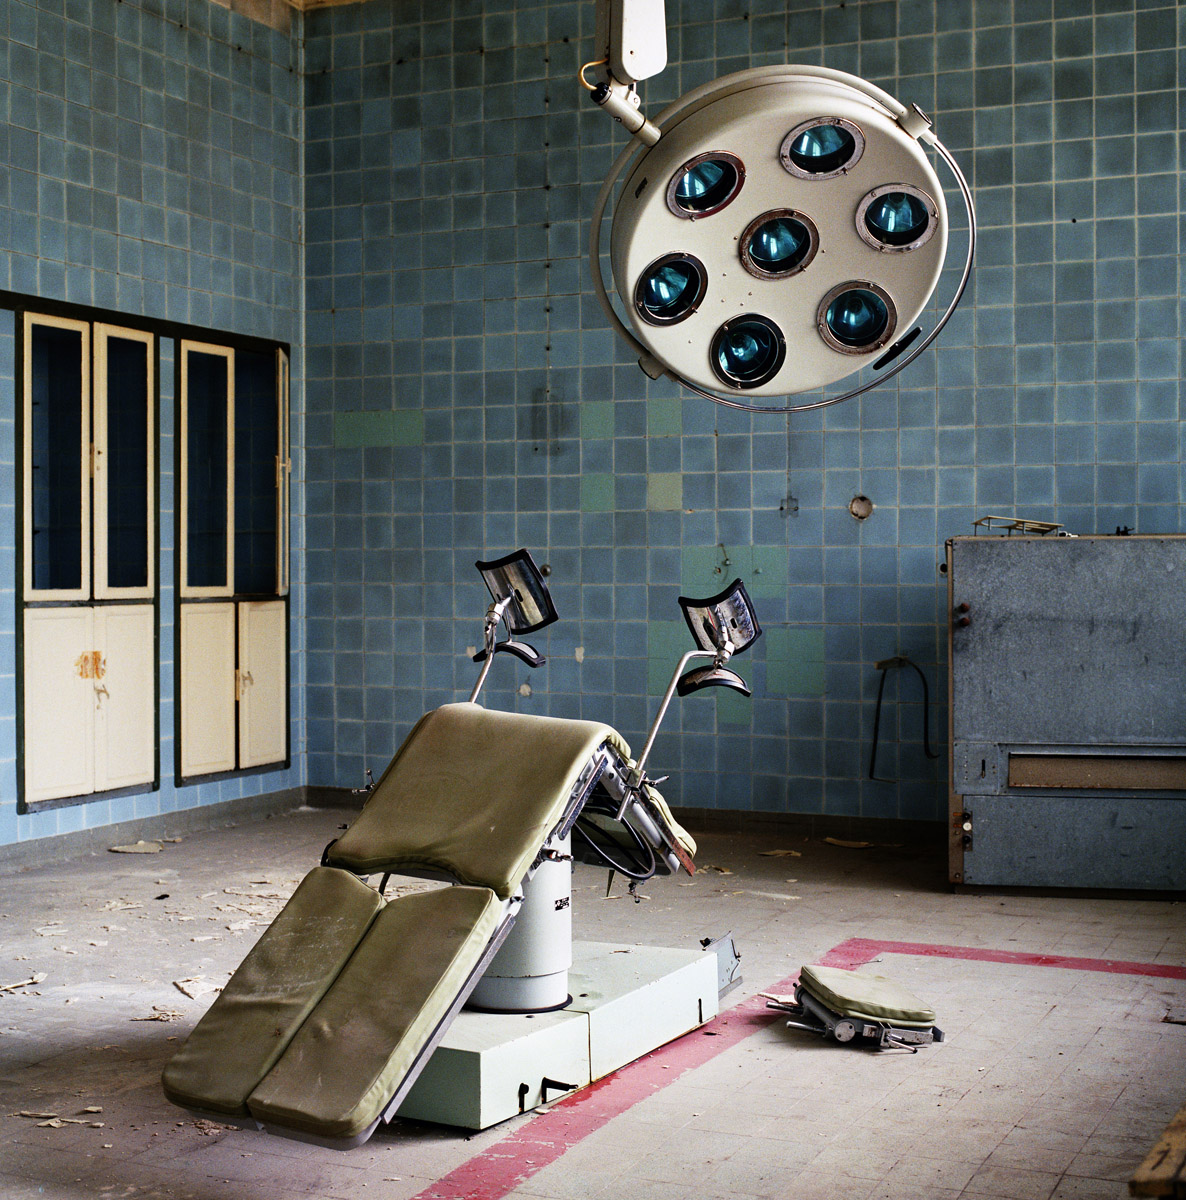 PRESS PHOTO ONLY TO BE USED IN RELATION WITH EXHIBITION RELICS OF THE COLD WAR IN DHM, BERLIN 2016. CUTTING PICTURES IS NOT ALLOWED. Germany East, Juterbog  Soviet Army hospital. Foto: Martin Roemers